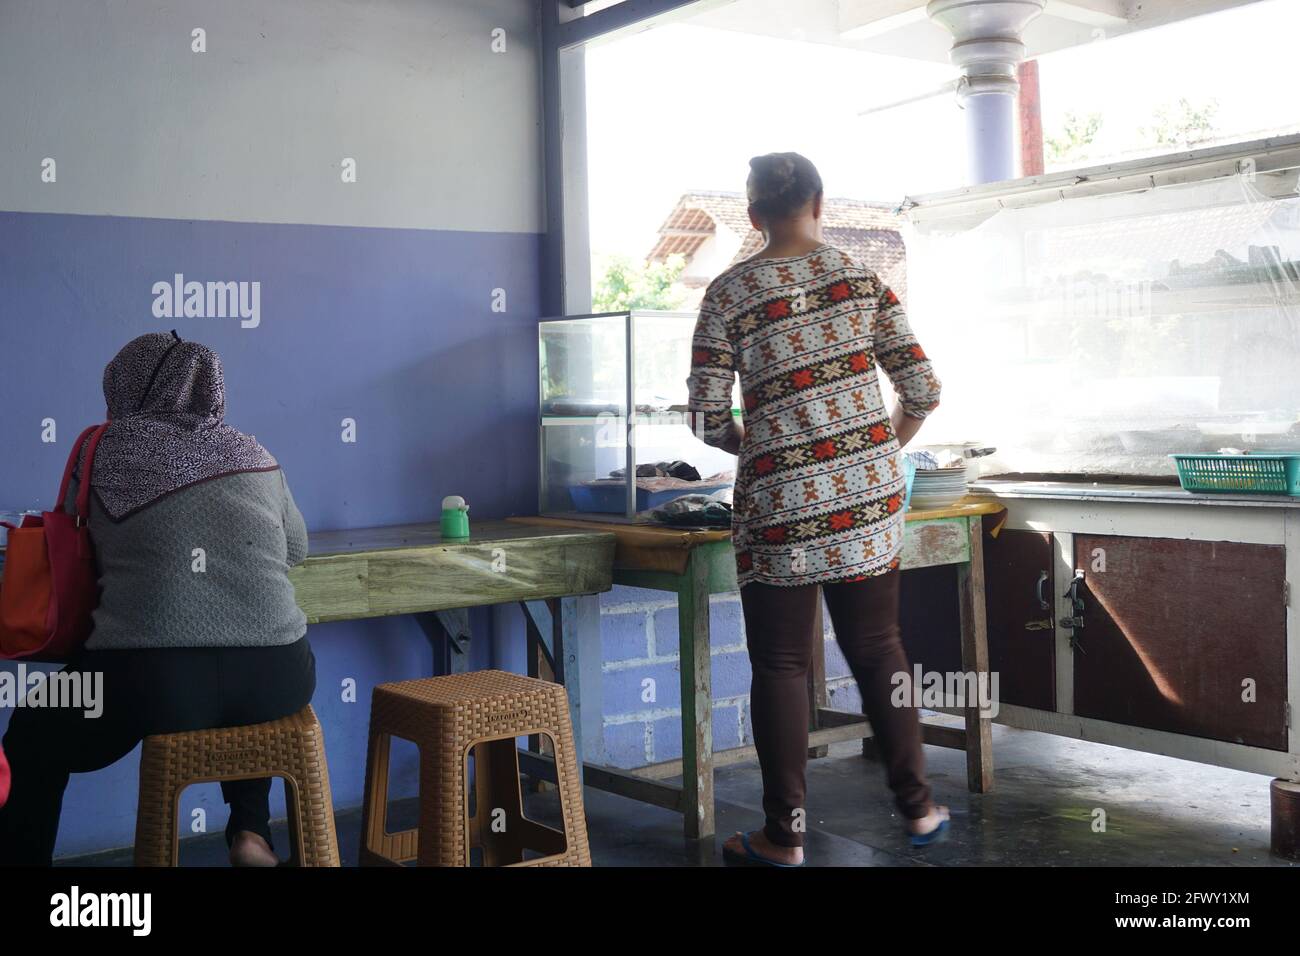 Warung is indonesian traditional restaurant Stock Photo